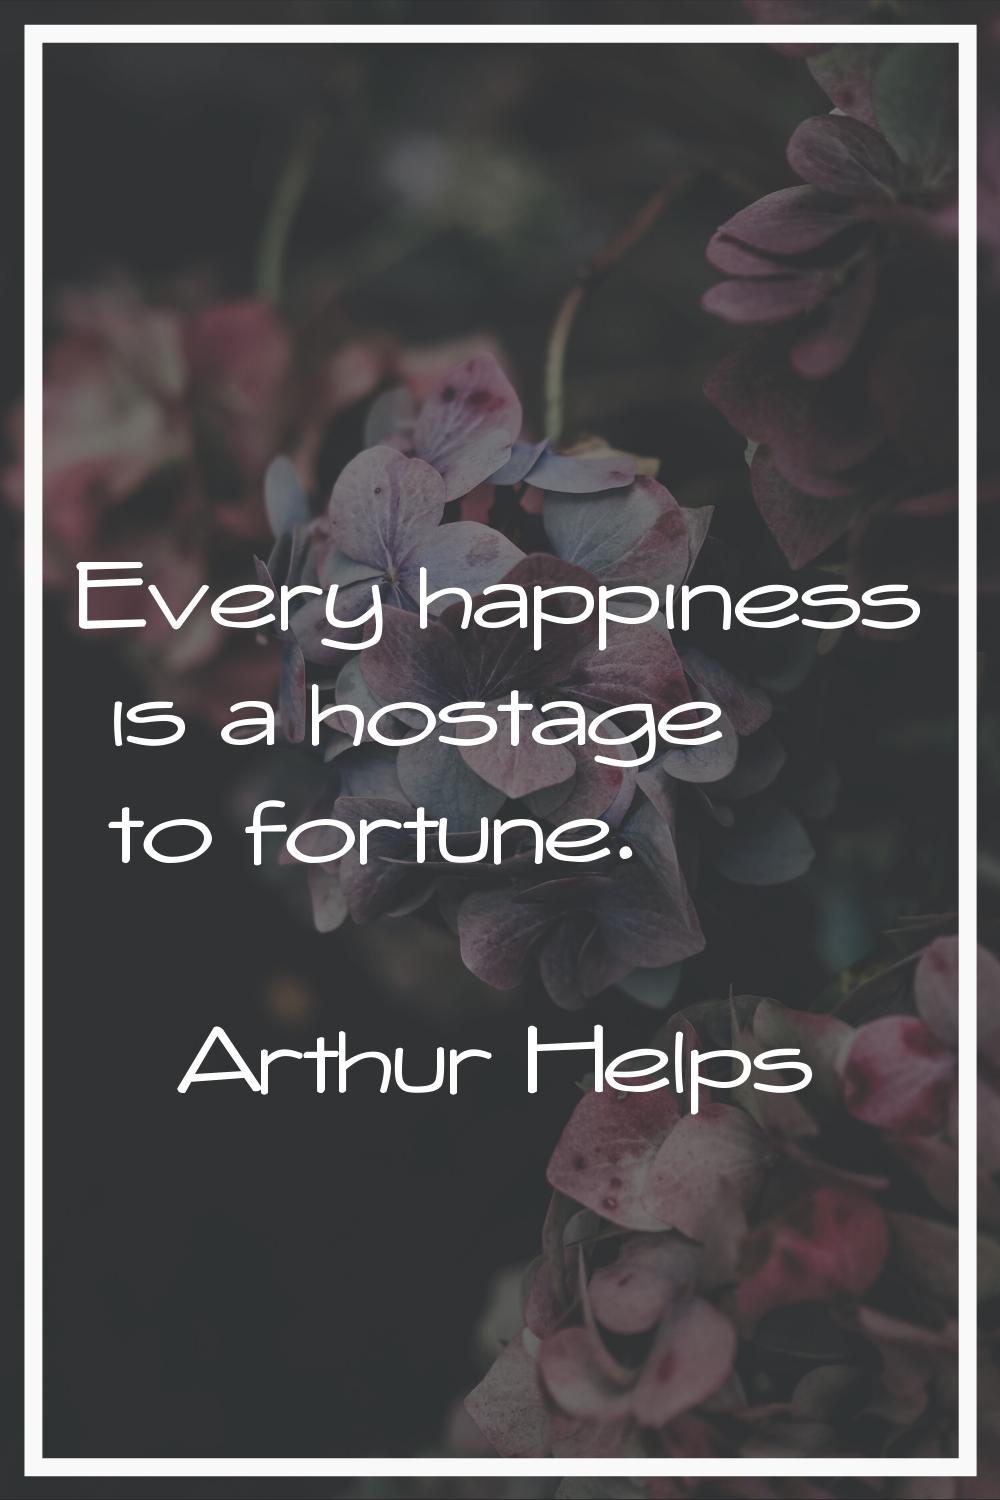 Every happiness is a hostage to fortune.